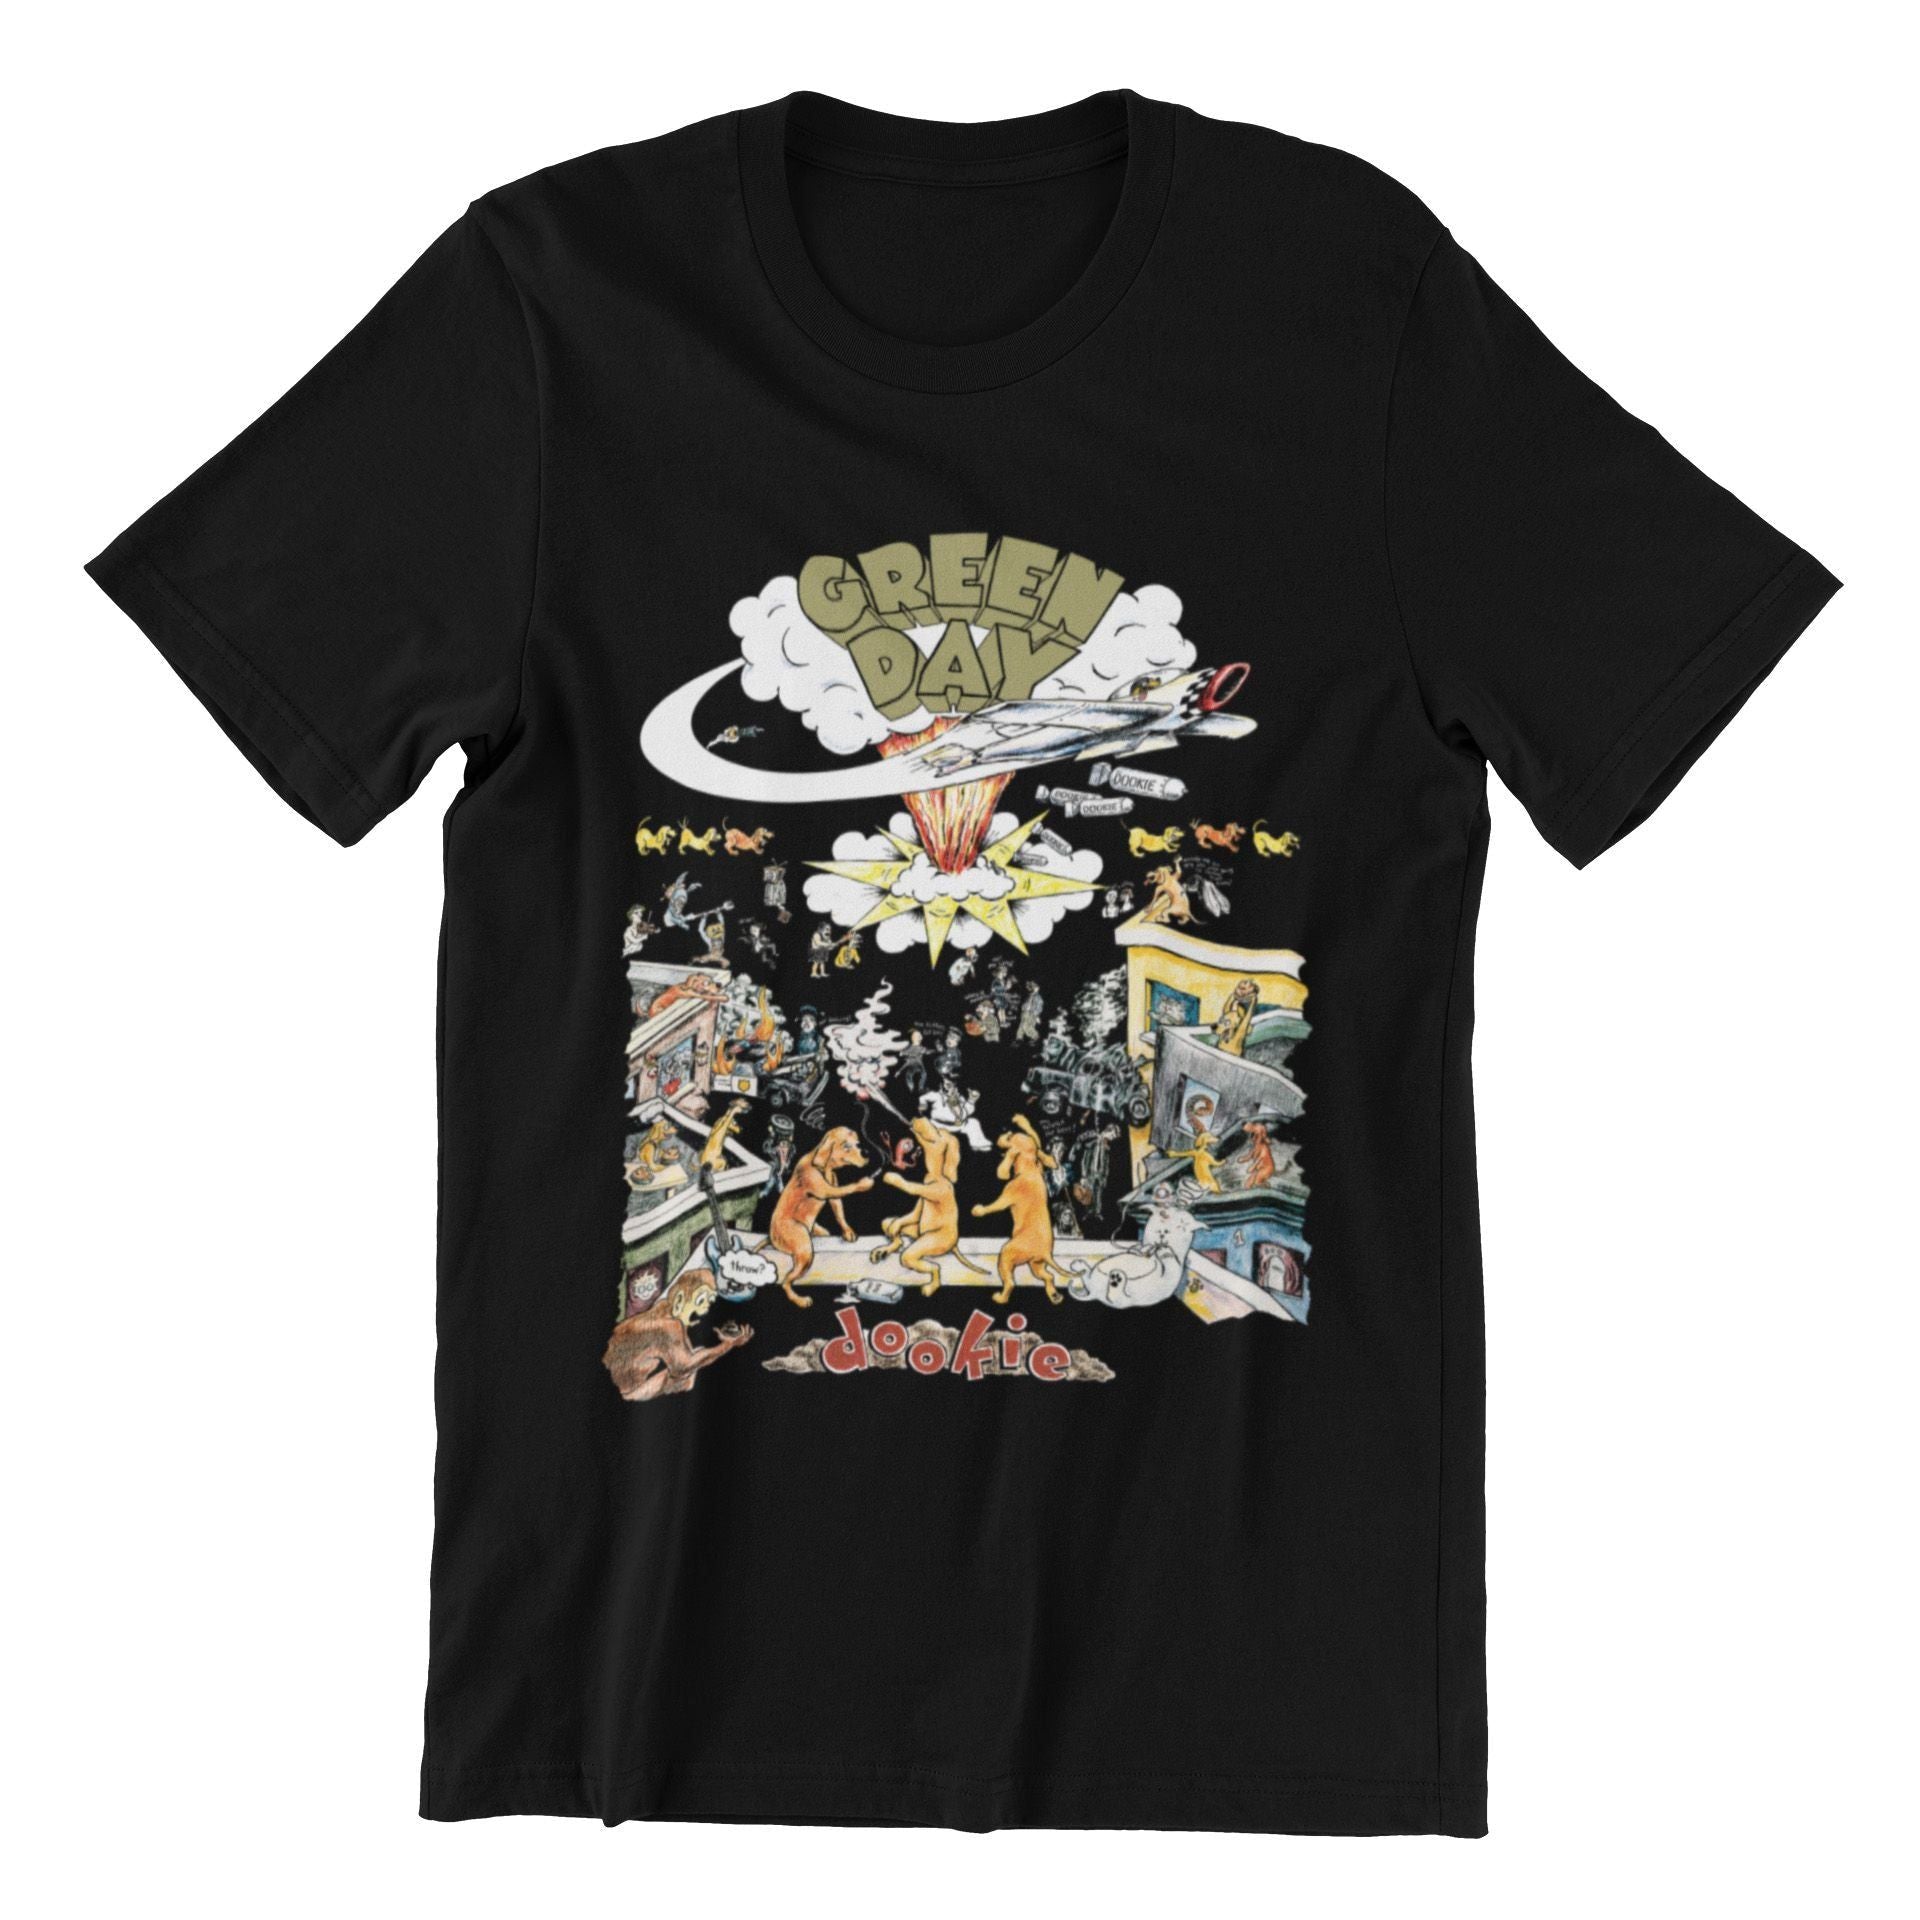 Clean Lines Green Day Dookie S/S Tee